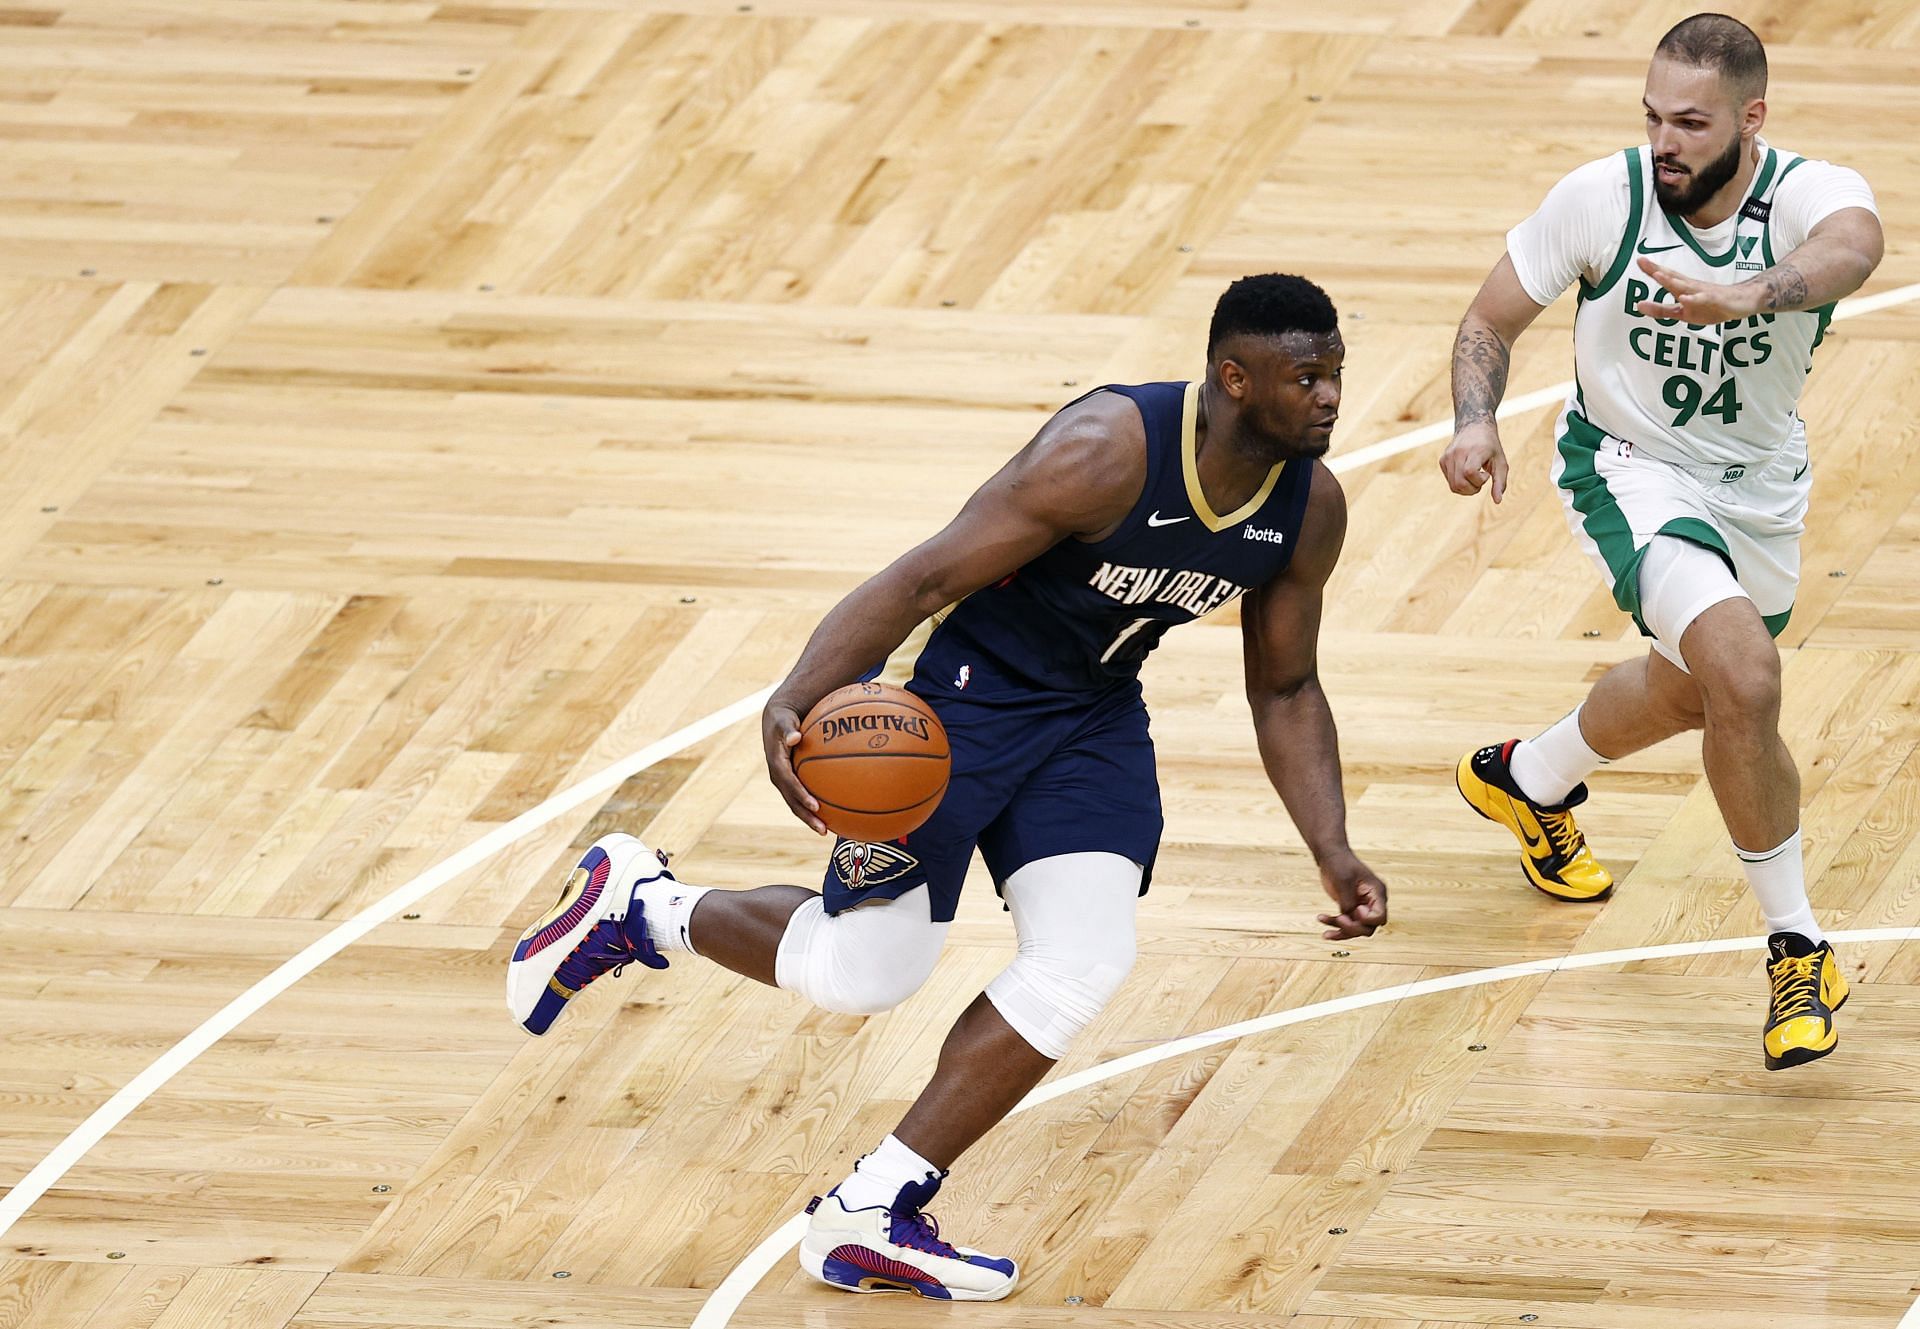 Zion Williamson #1 of the New Orleans Pelicans drives to the basket past Evan Fournier #94 of the Boston Celtics during the second quarter at TD Garden on March 29, 2021 in Boston, Massachusetts